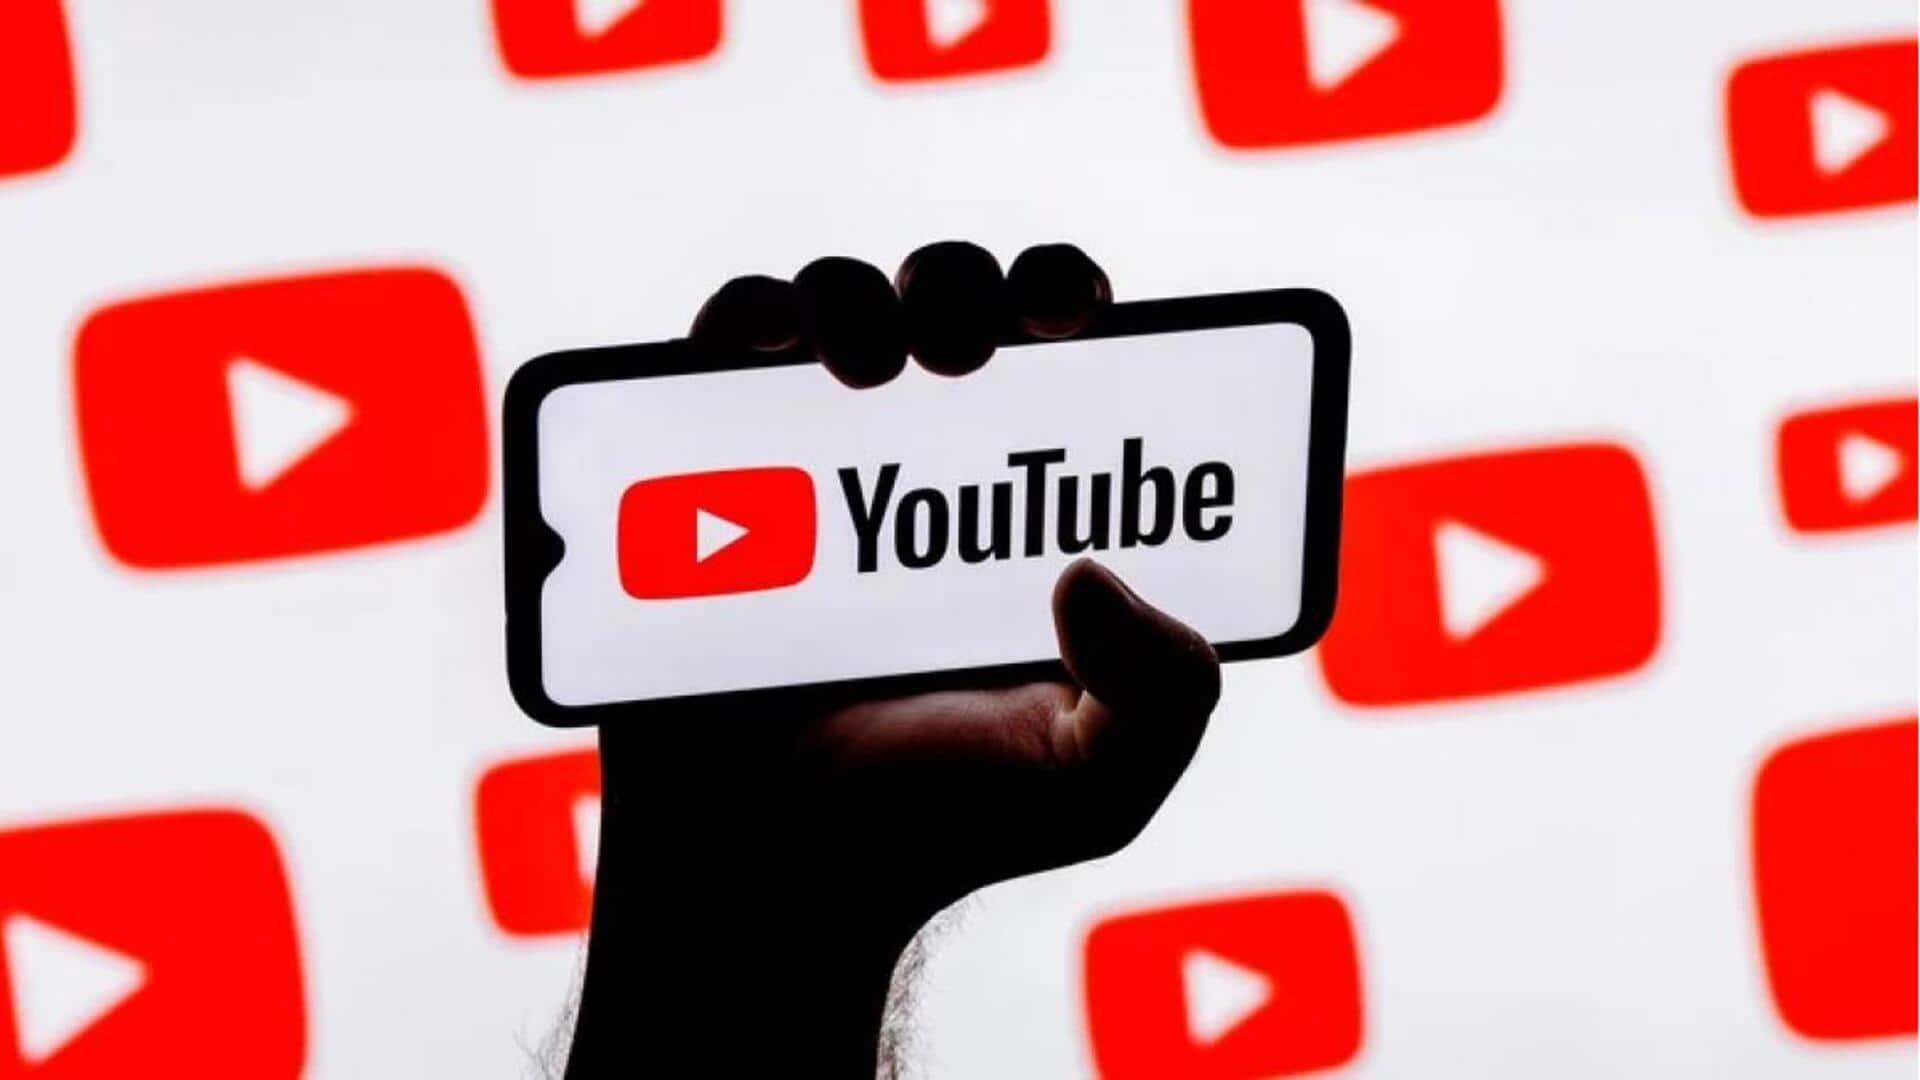 YouTube removes over 2 million videos in India: Here's why